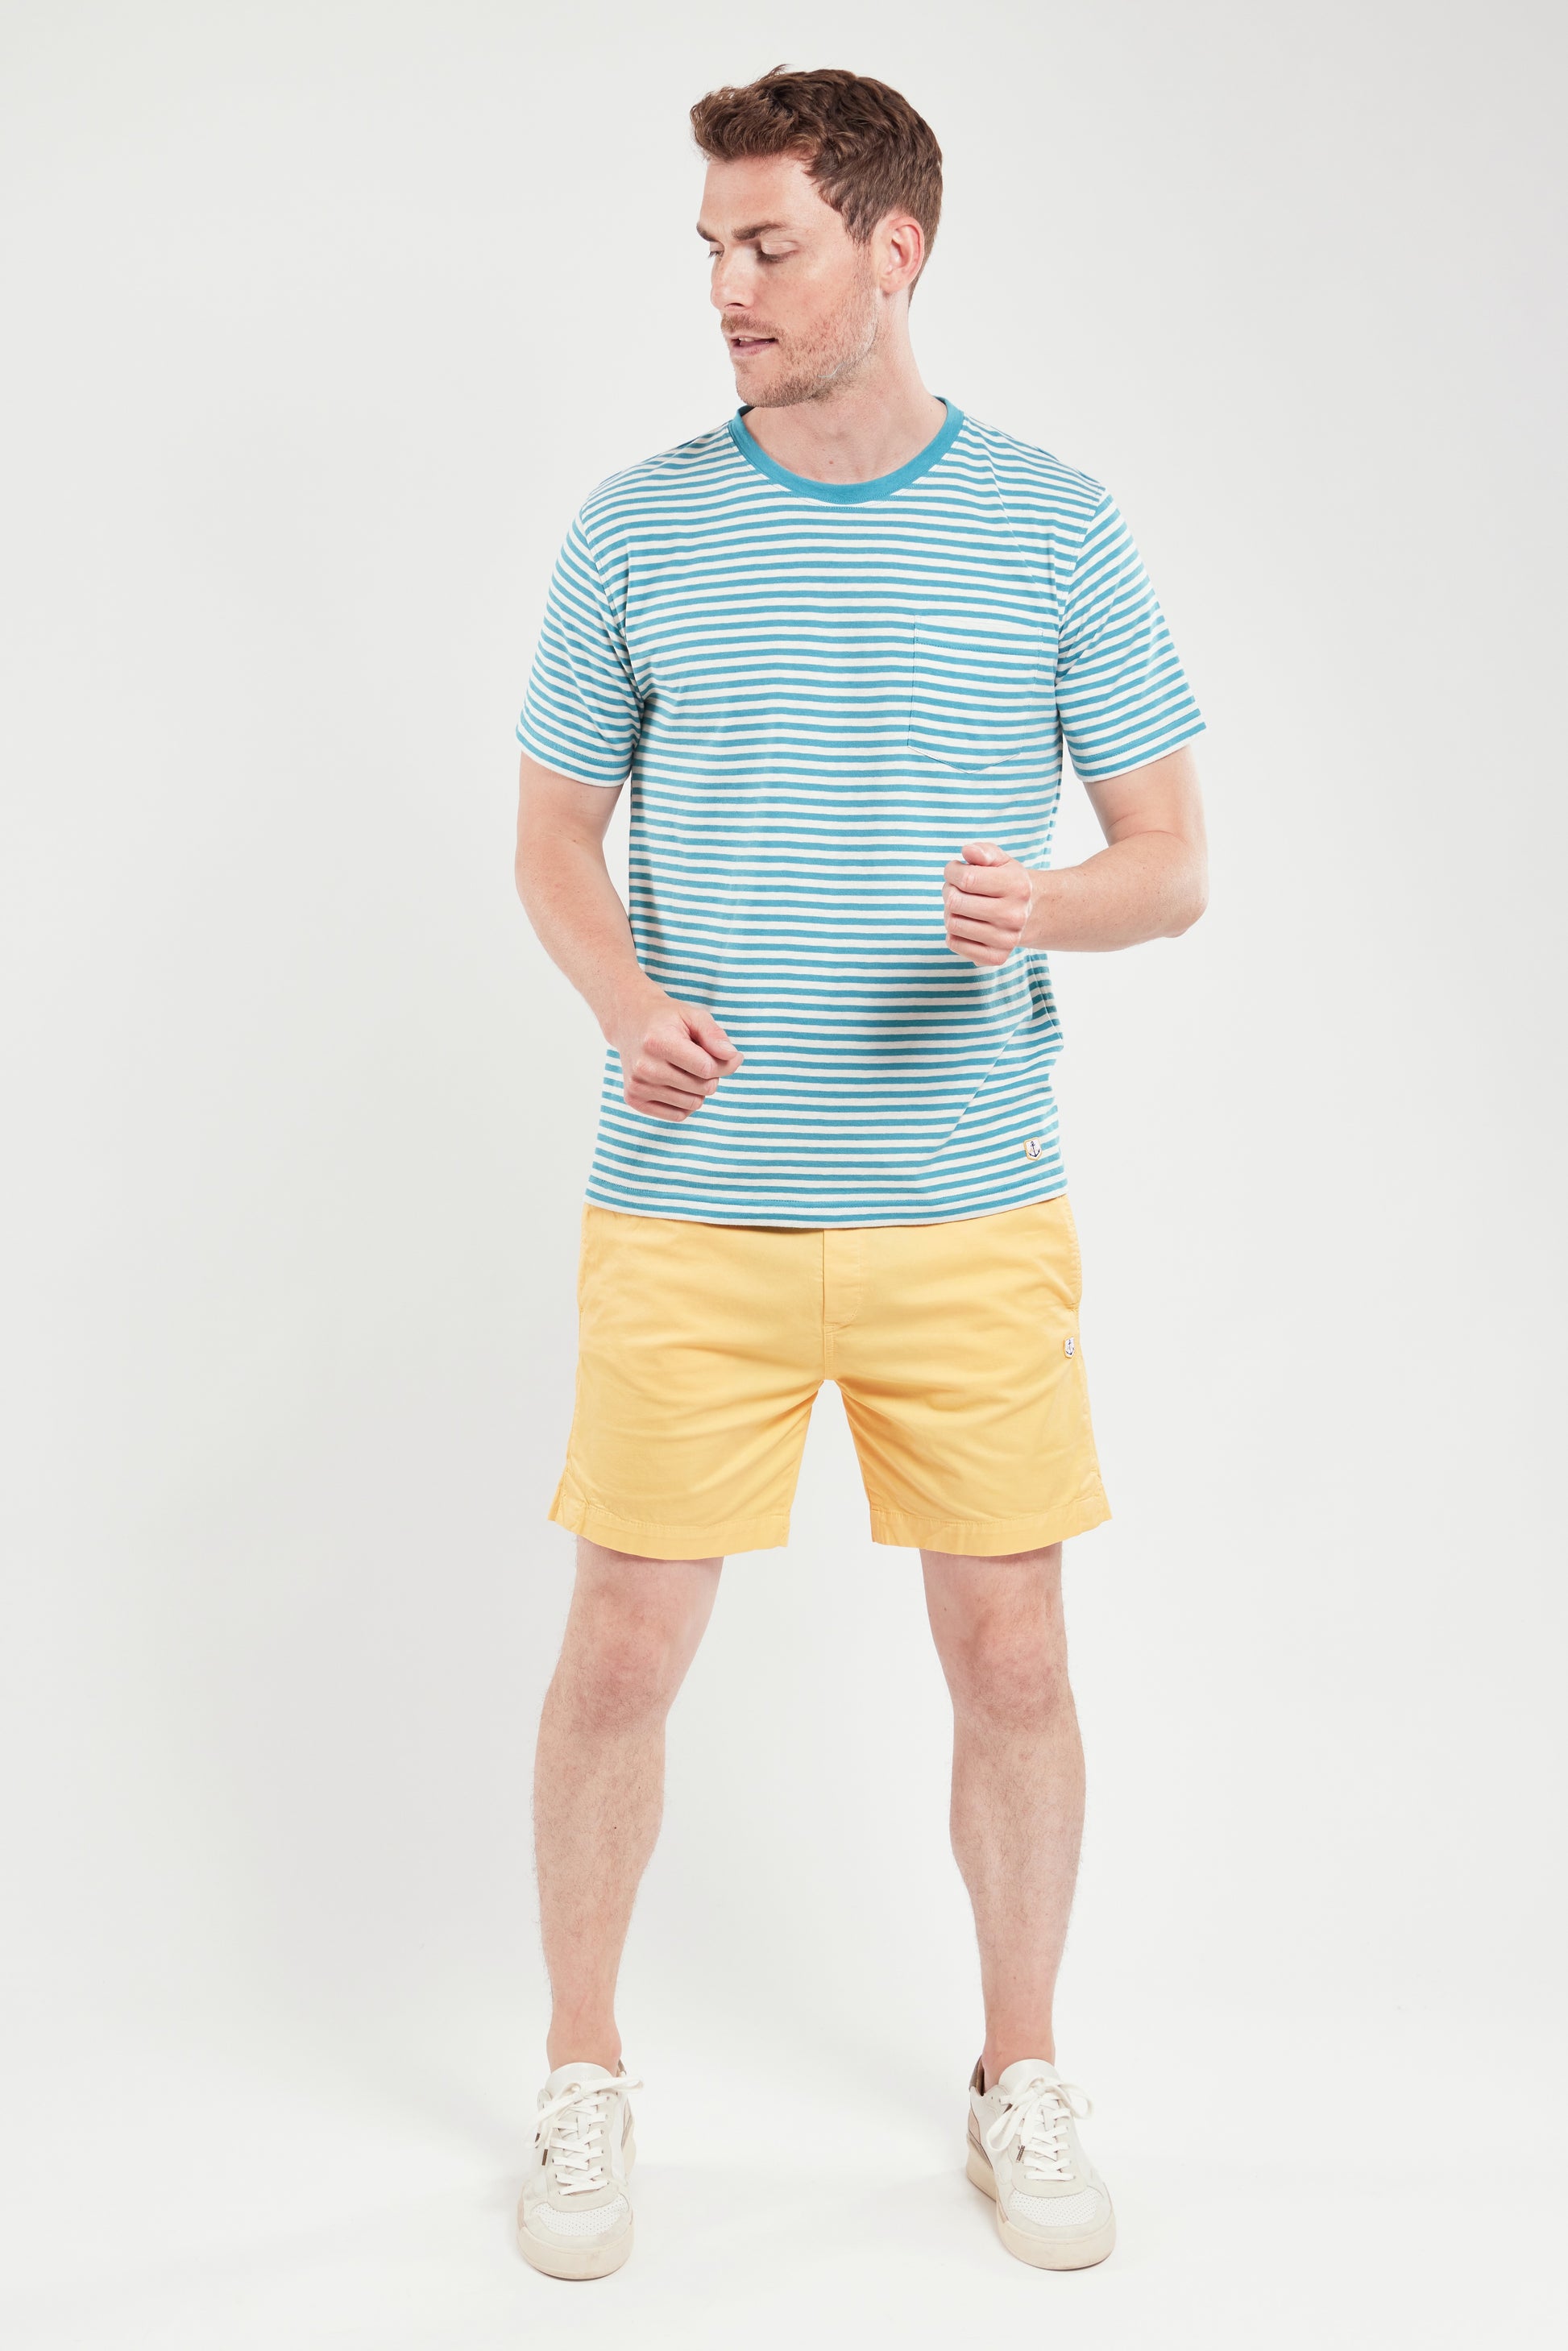 Armor Lux Heritage Short Sleeve Striped T-Shirt in pagoda aqua blue and nature cream